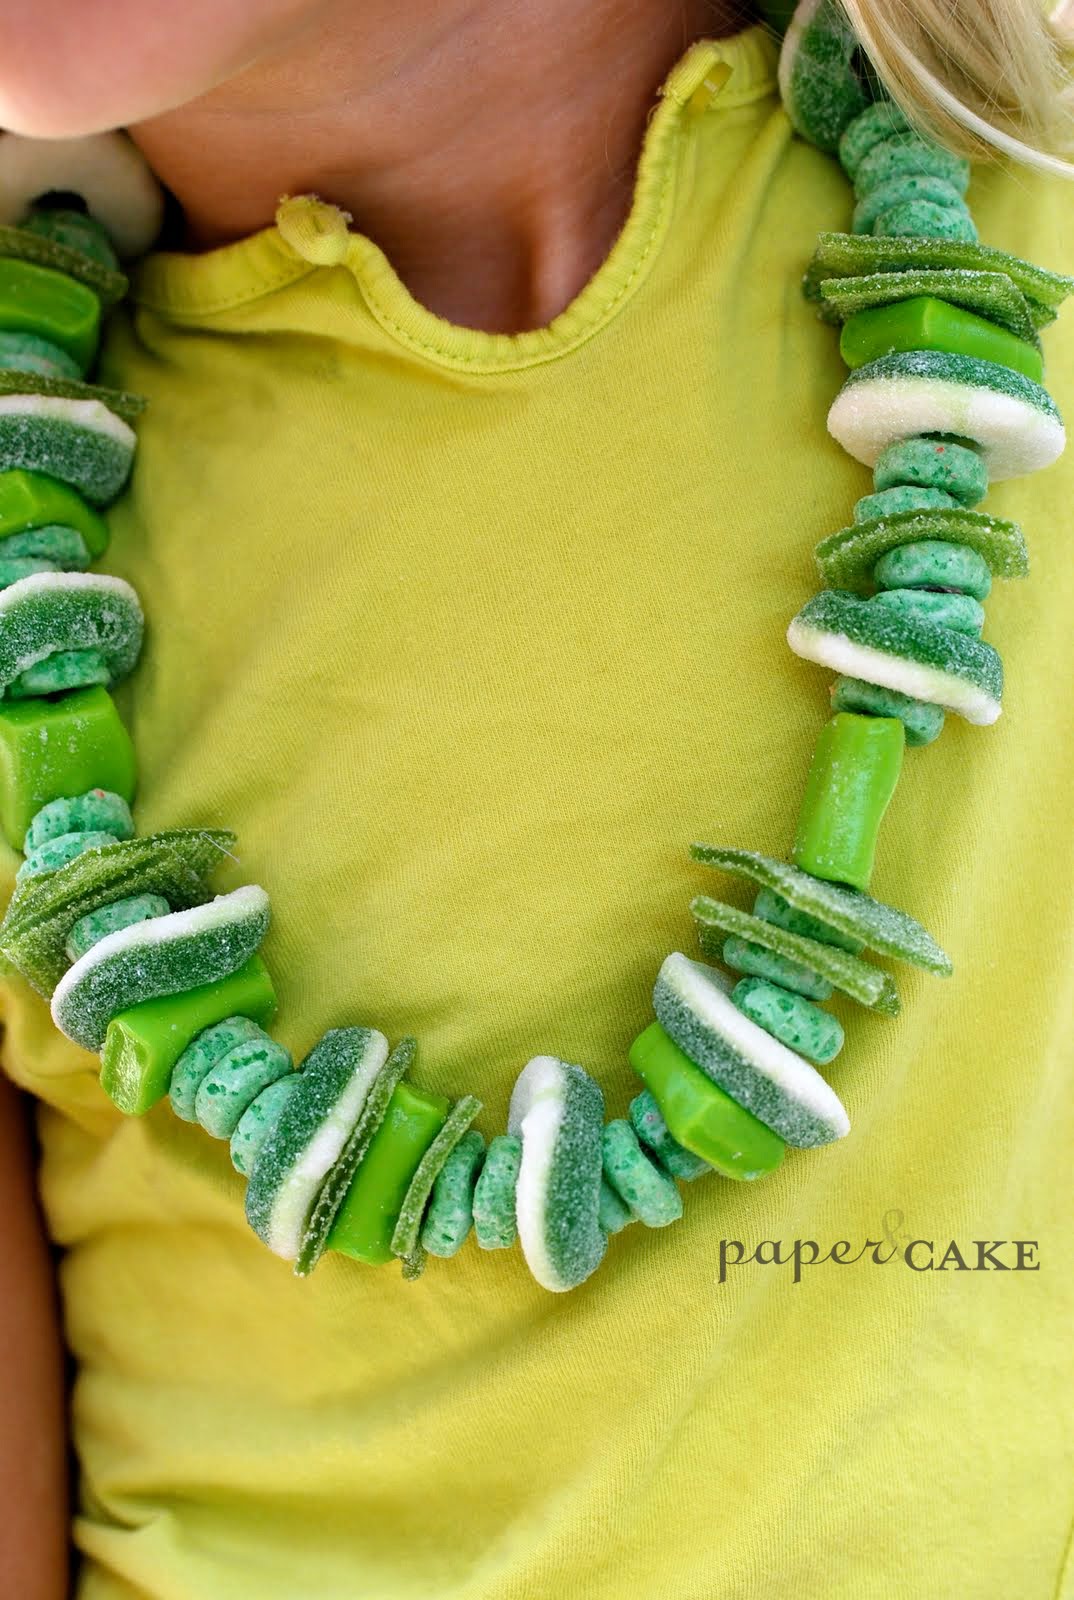 Stay-At-Home-Moms-of-Etsy: Tuesday Tutorial - Candy Necklace